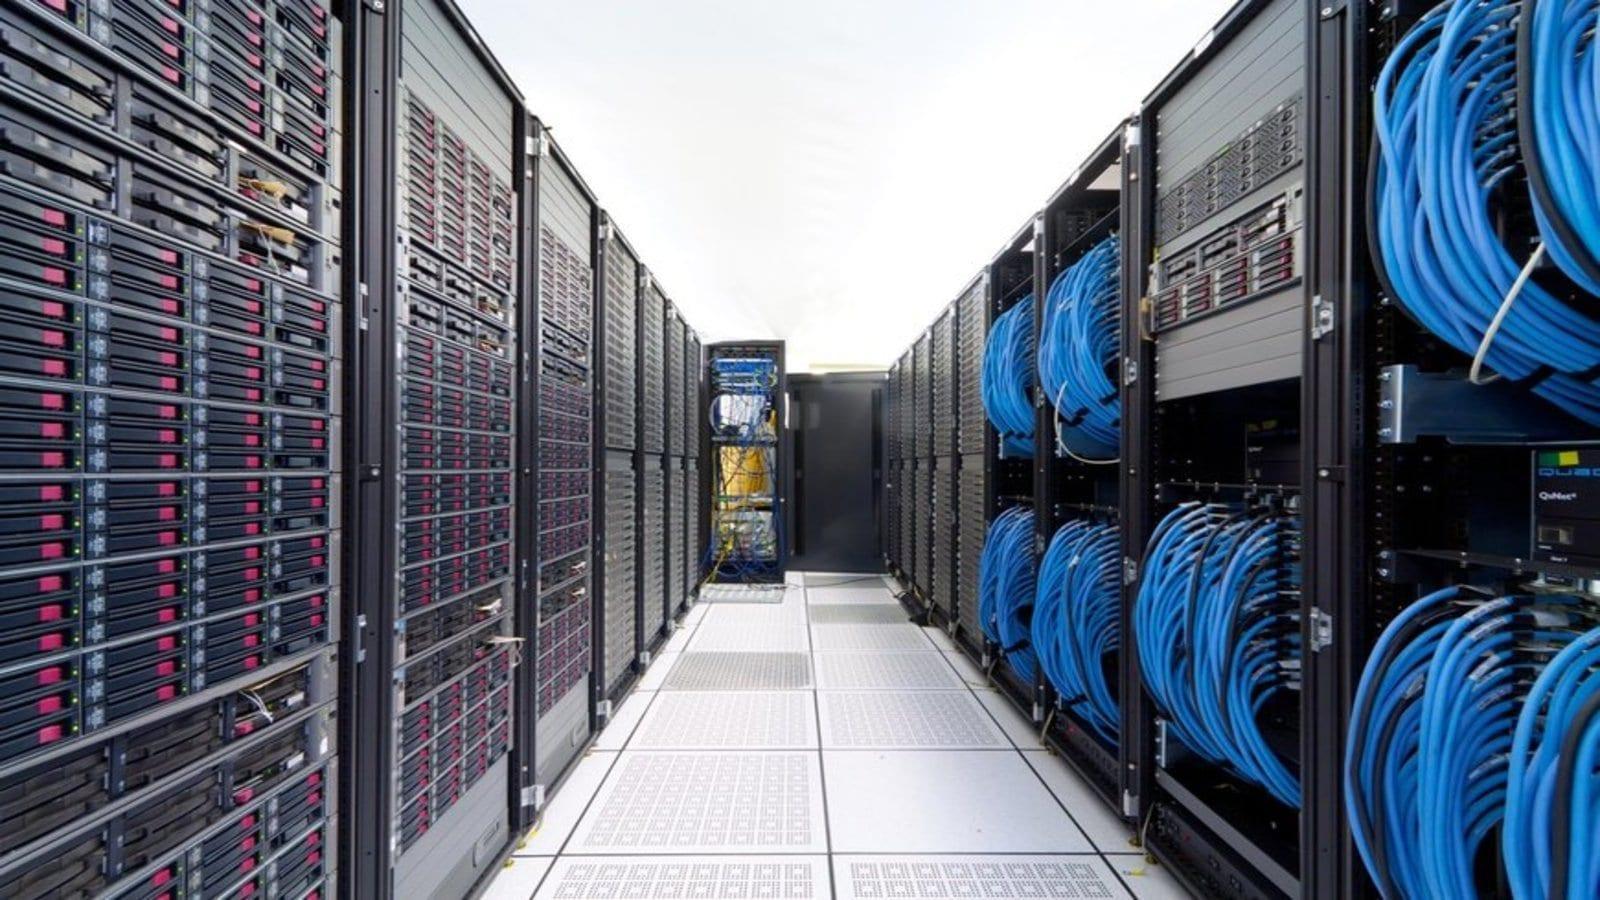 US$3.5 Billion in Investments: Unlocking Africa’s Data Center Potential